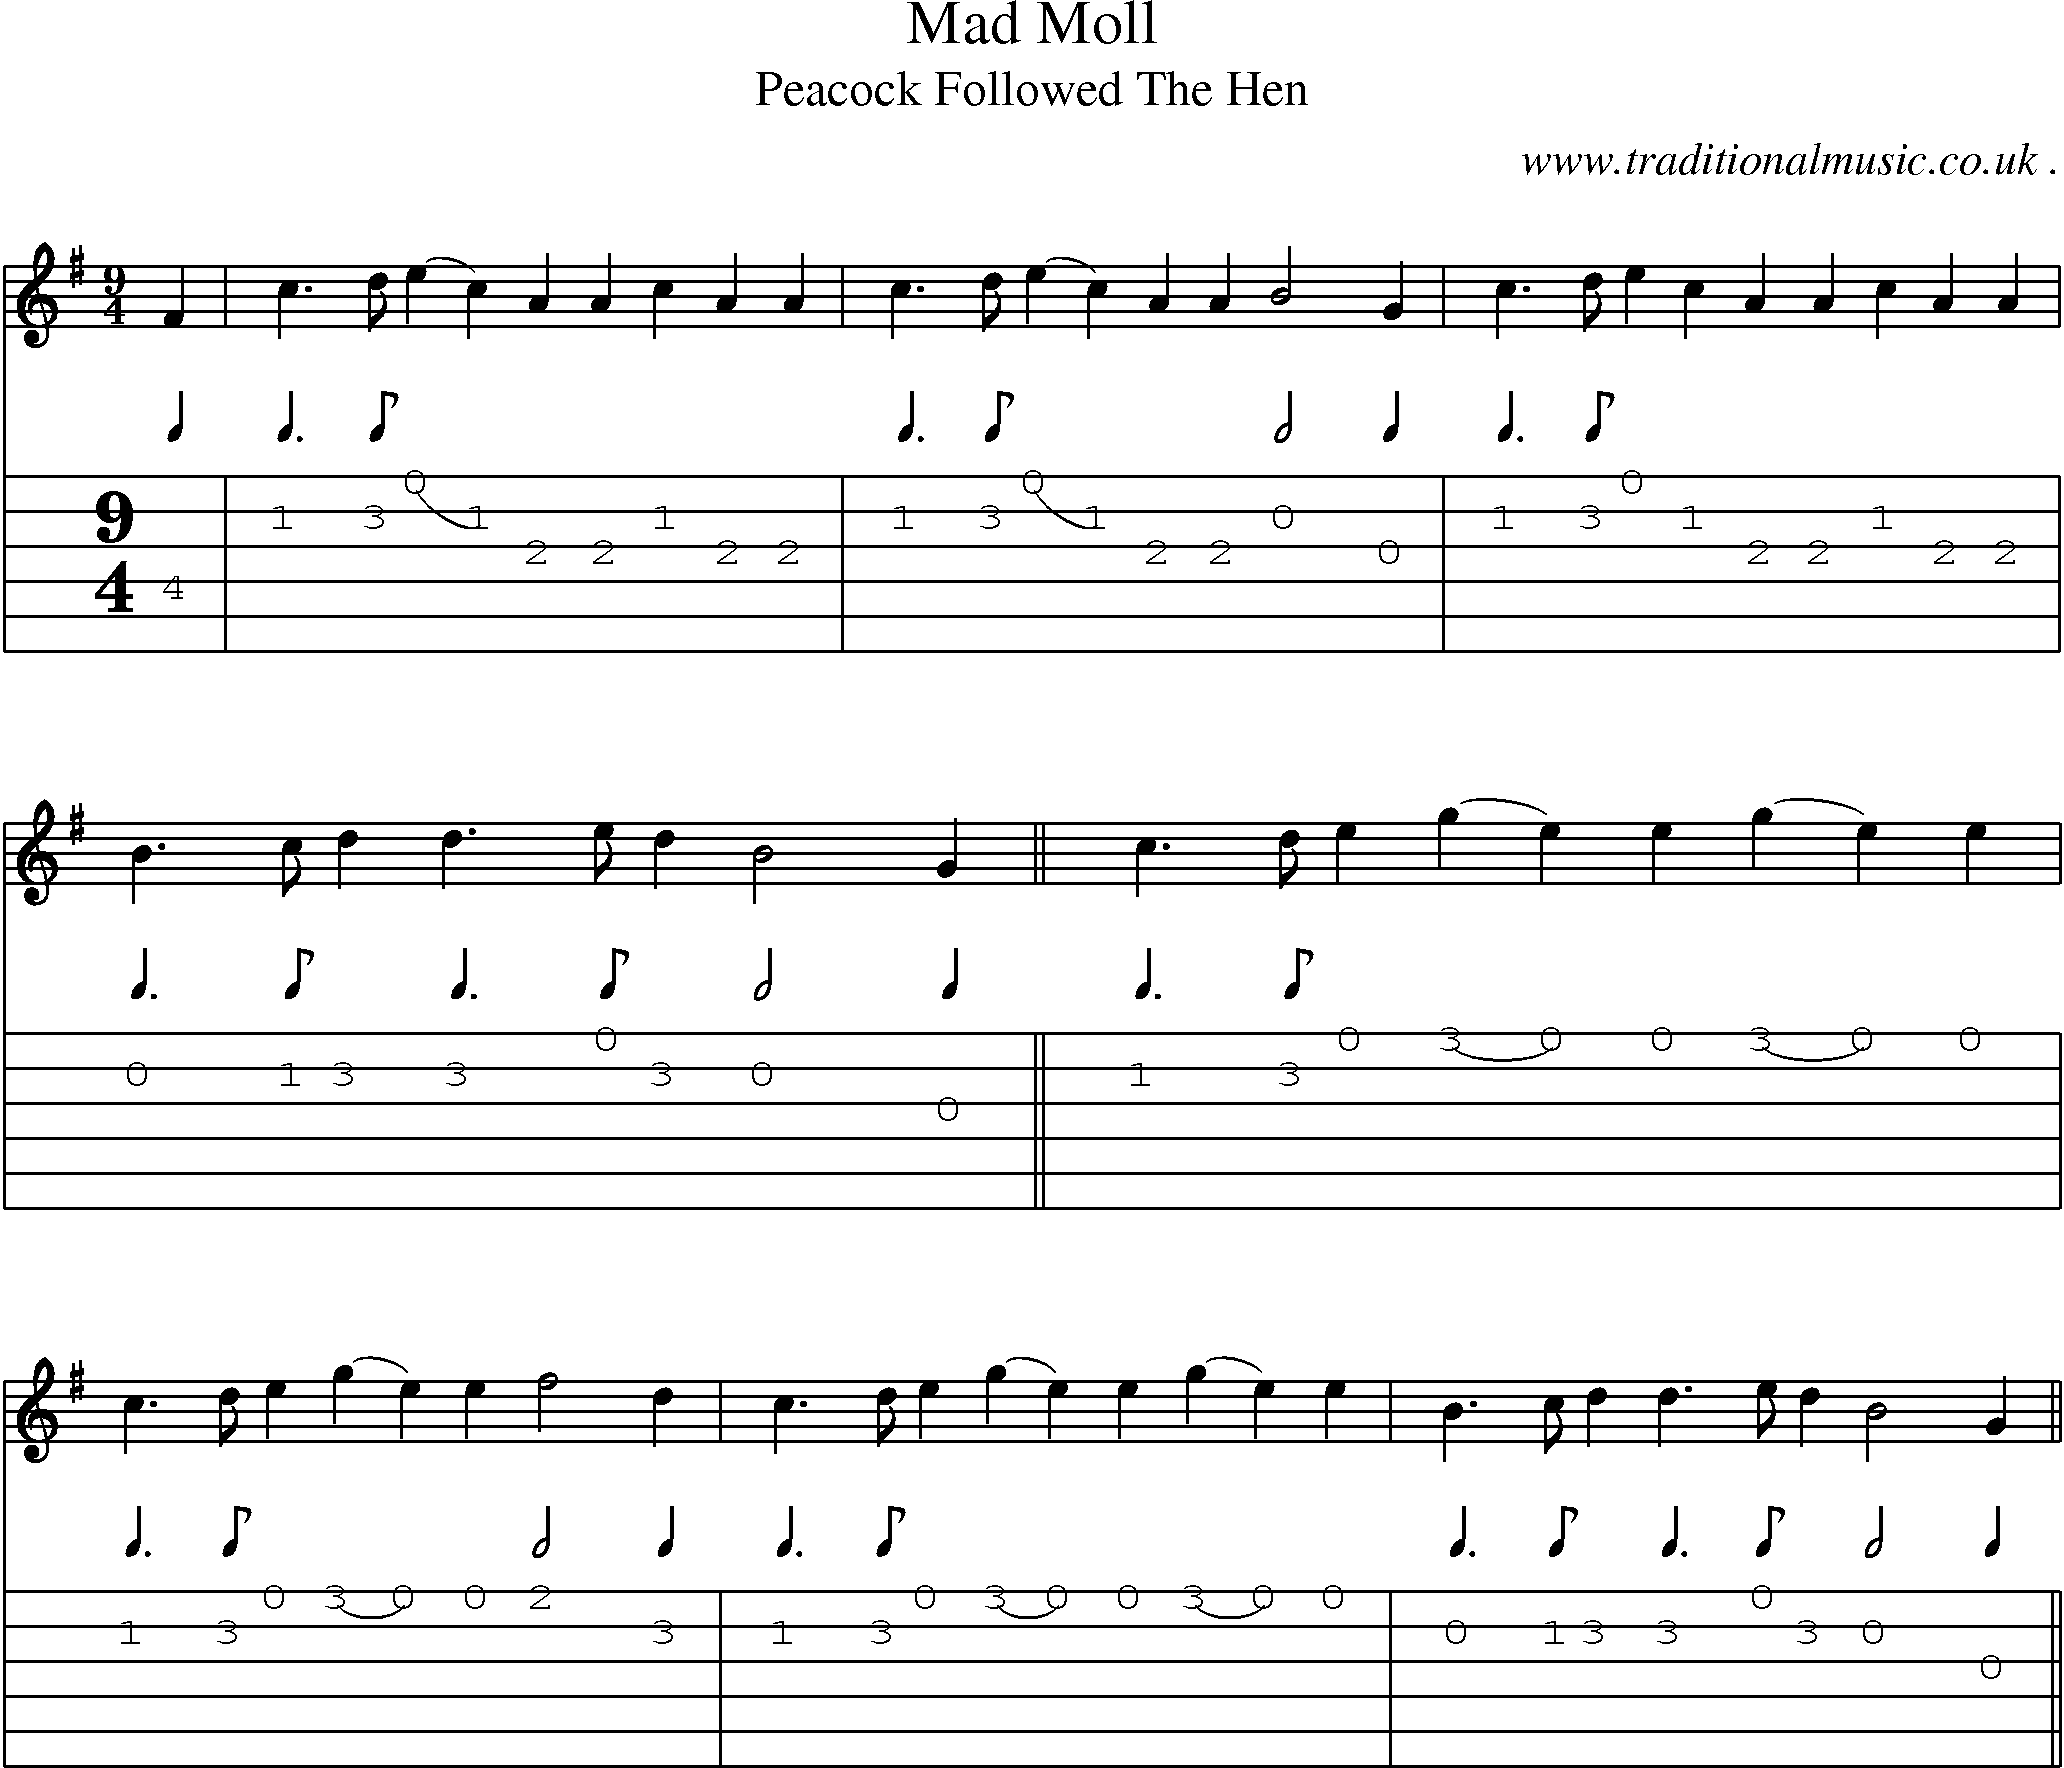 Sheet-Music and Guitar Tabs for Mad Moll